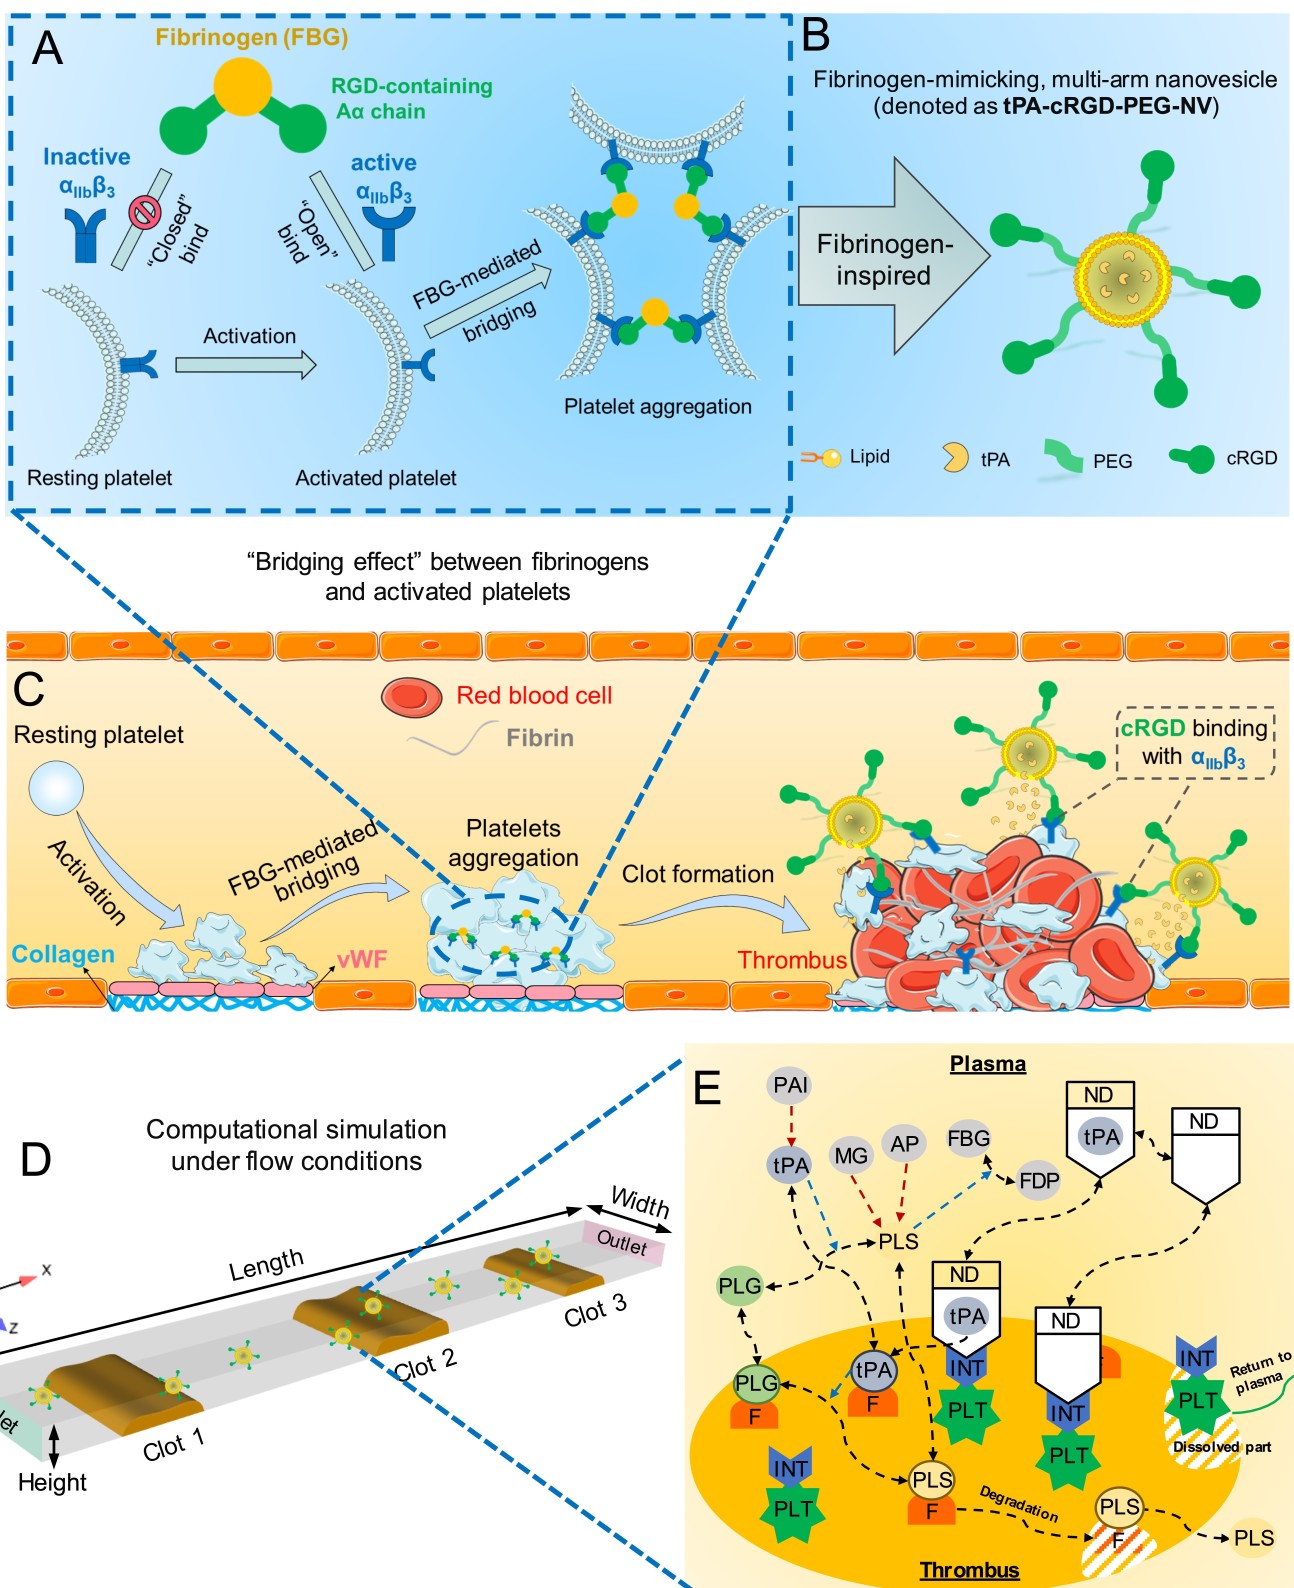 Schematic illustrations of platelet aggregation, blood clot formation, targeted blood clot dissolution, and the computational model under flow conditions.